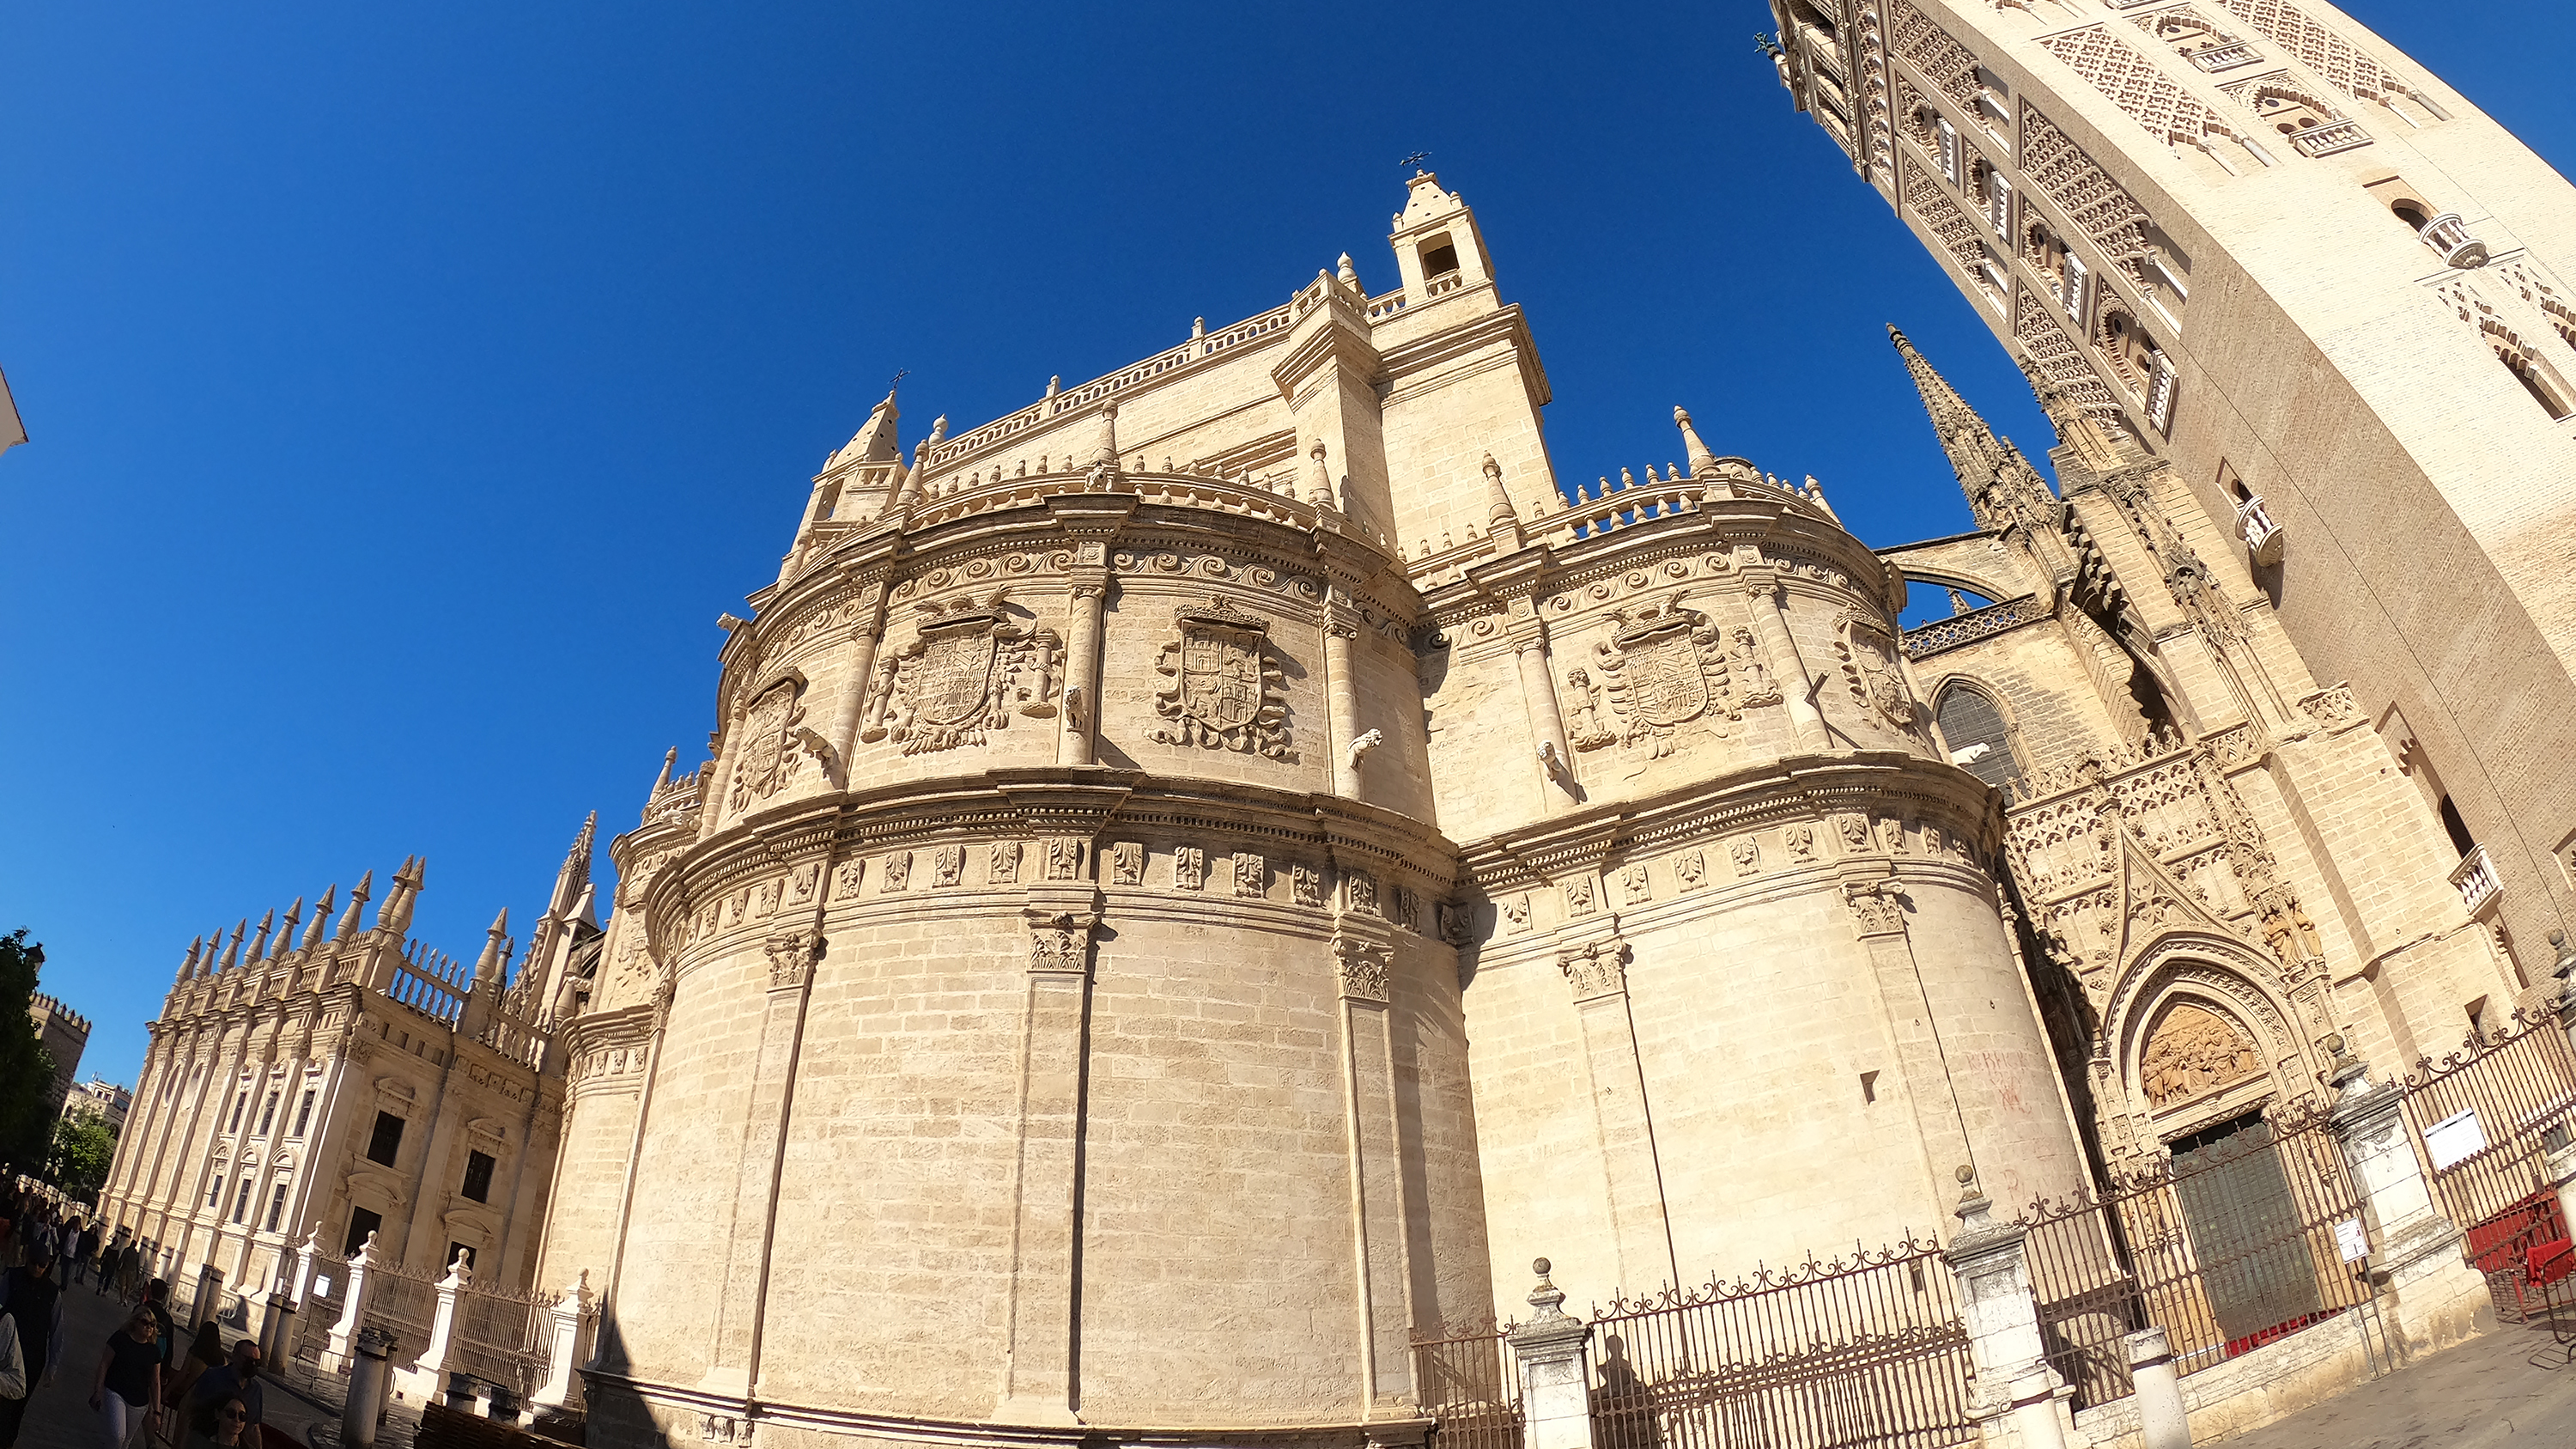 The majestic Seville Cathedral, which dates to back the 15th century, attracts thousands of visitors during Easter Week in Seville, Spain. Copyright / Credit: Sean Biffar.